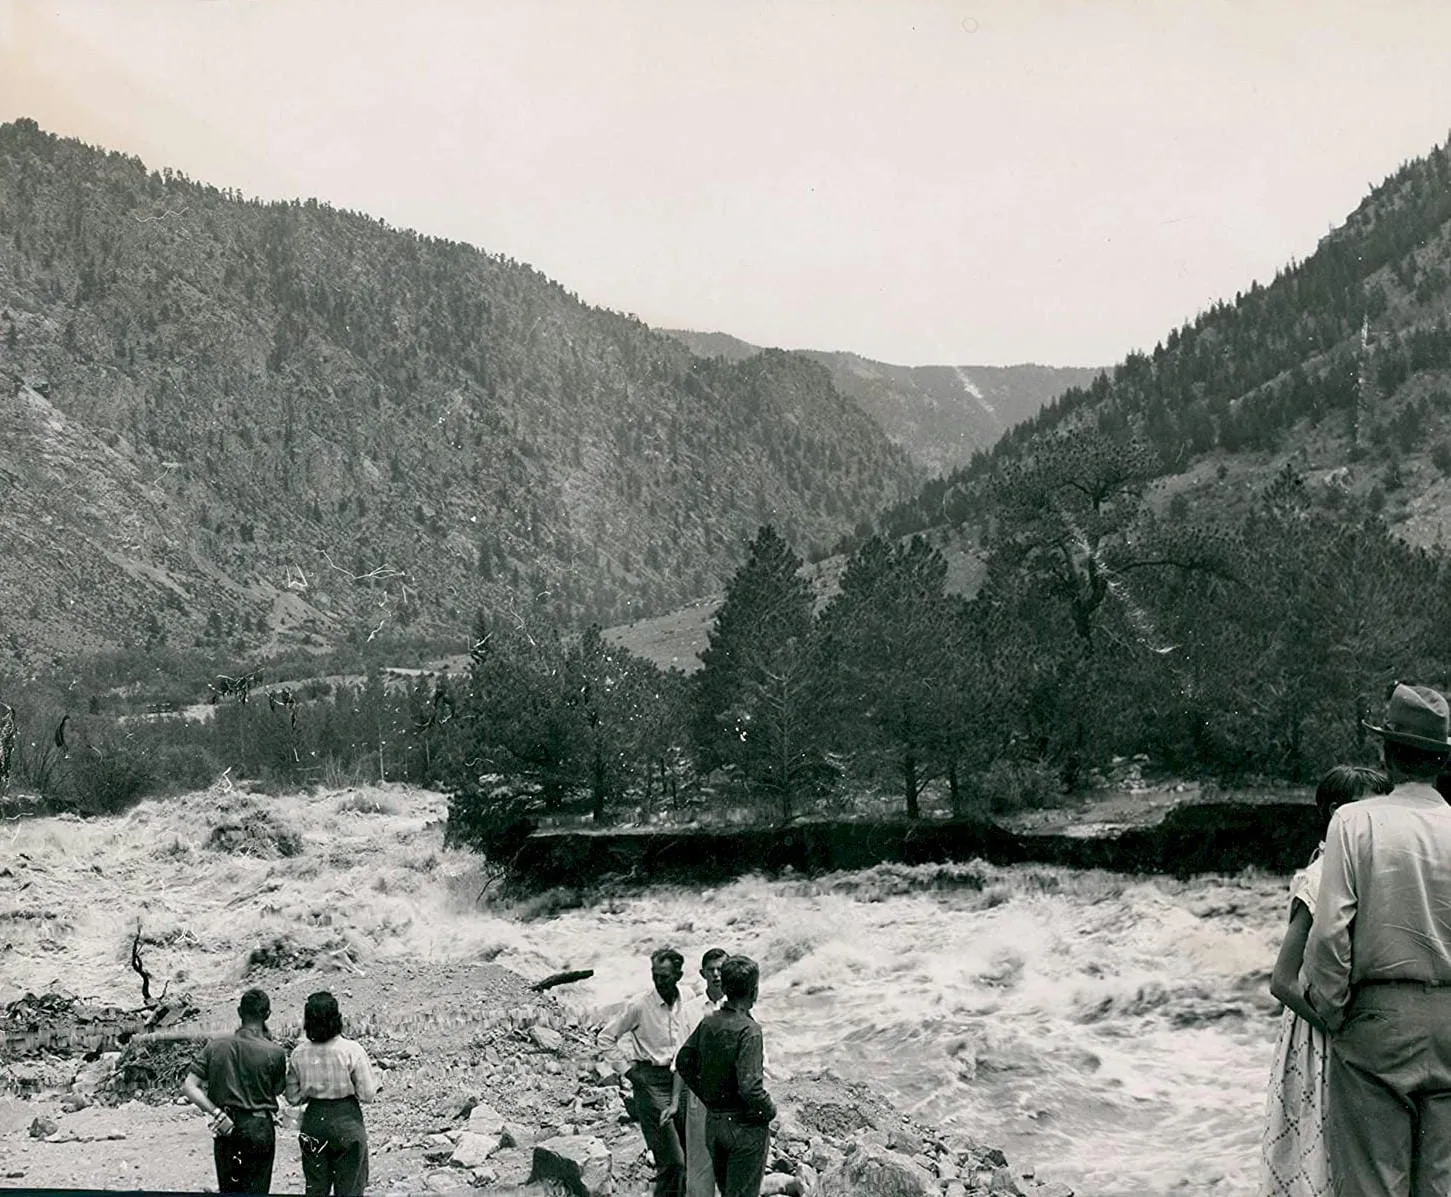 A group of people watch flood waters alongside a steep mountain slope - construction rubble along the bank.